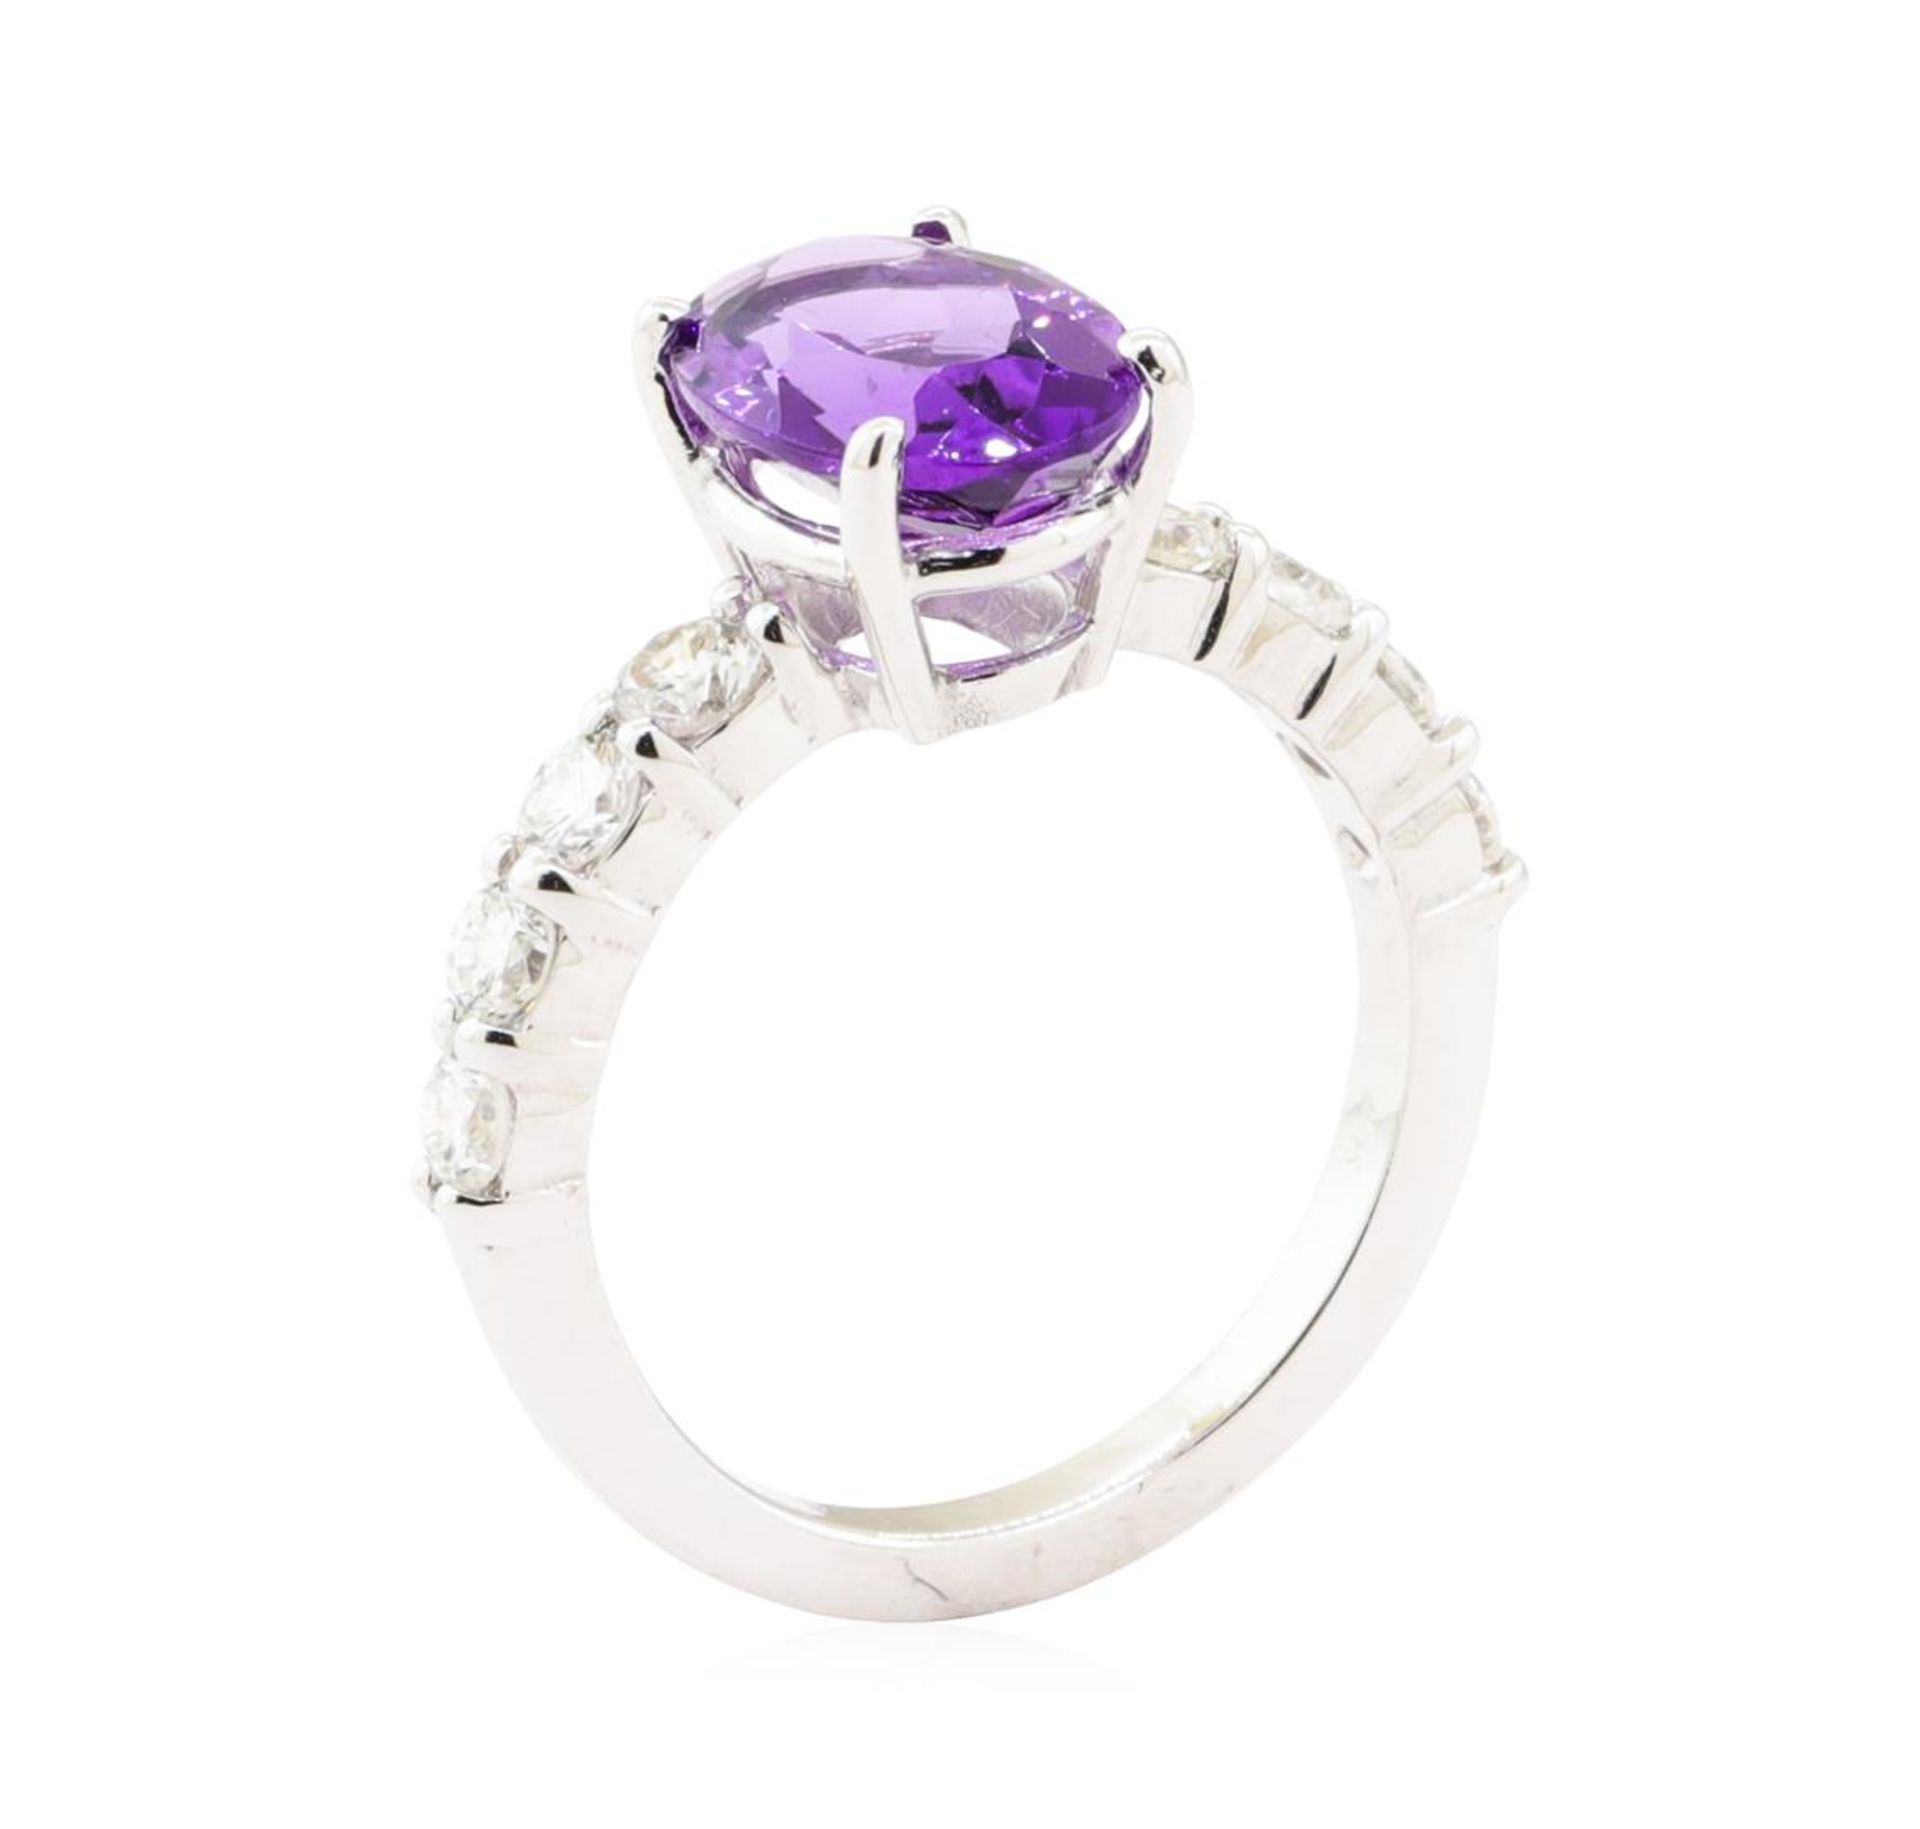 3.10 ctw Amethyst and Diamond Ring - 14KT White Gold - Image 4 of 4